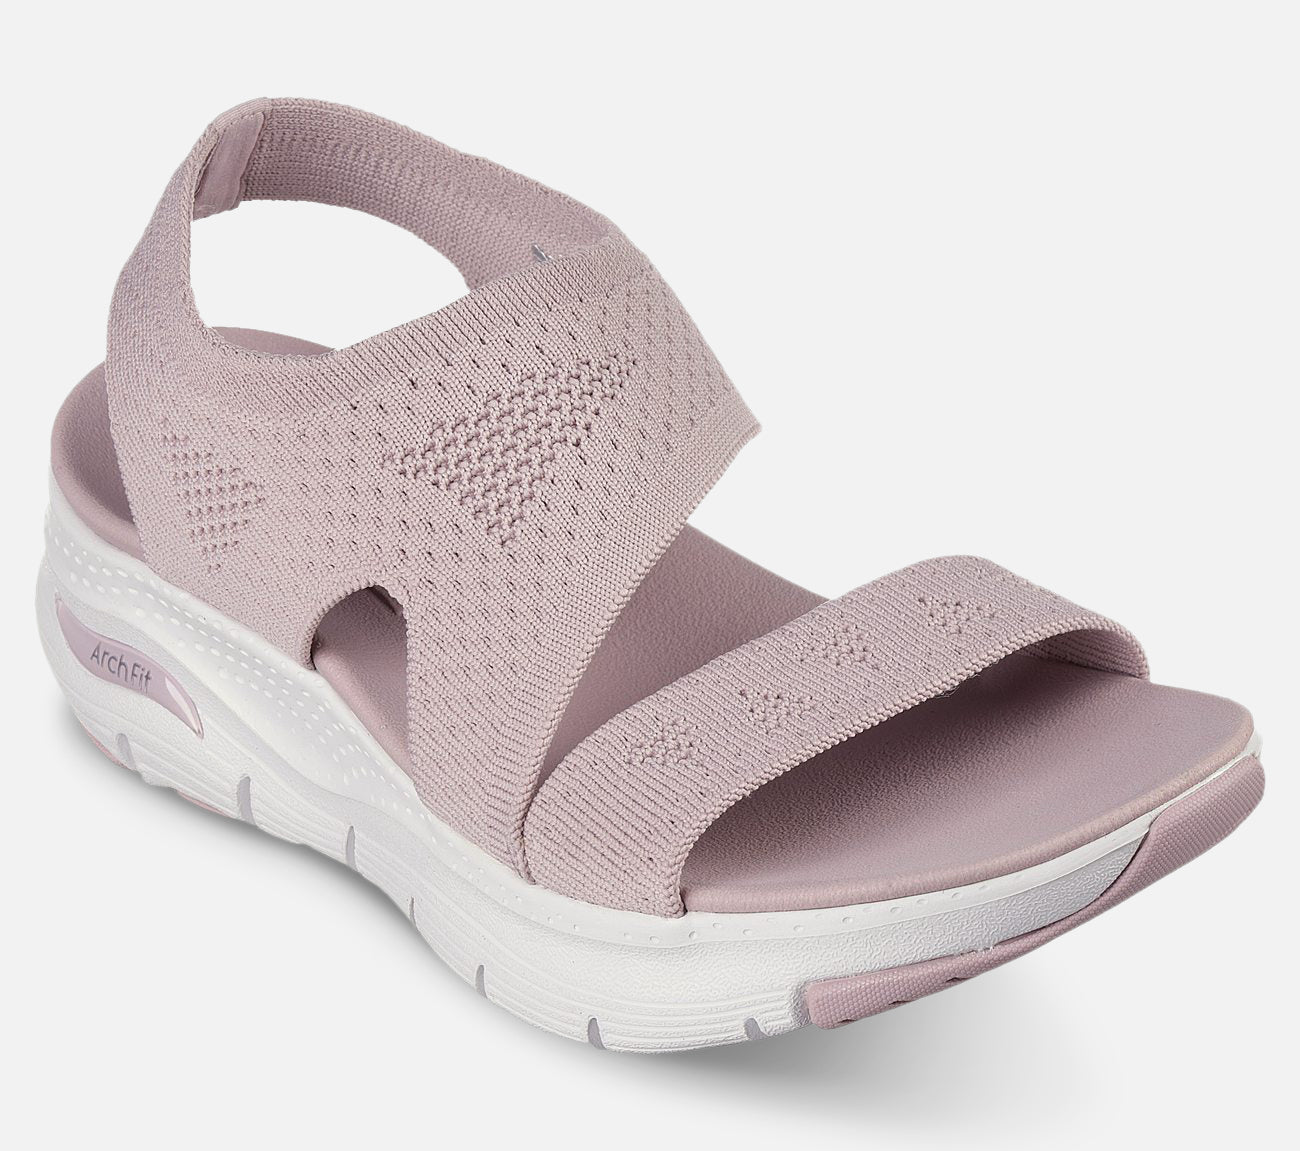 Arch Fit - Brightest Day Sandal Skechers